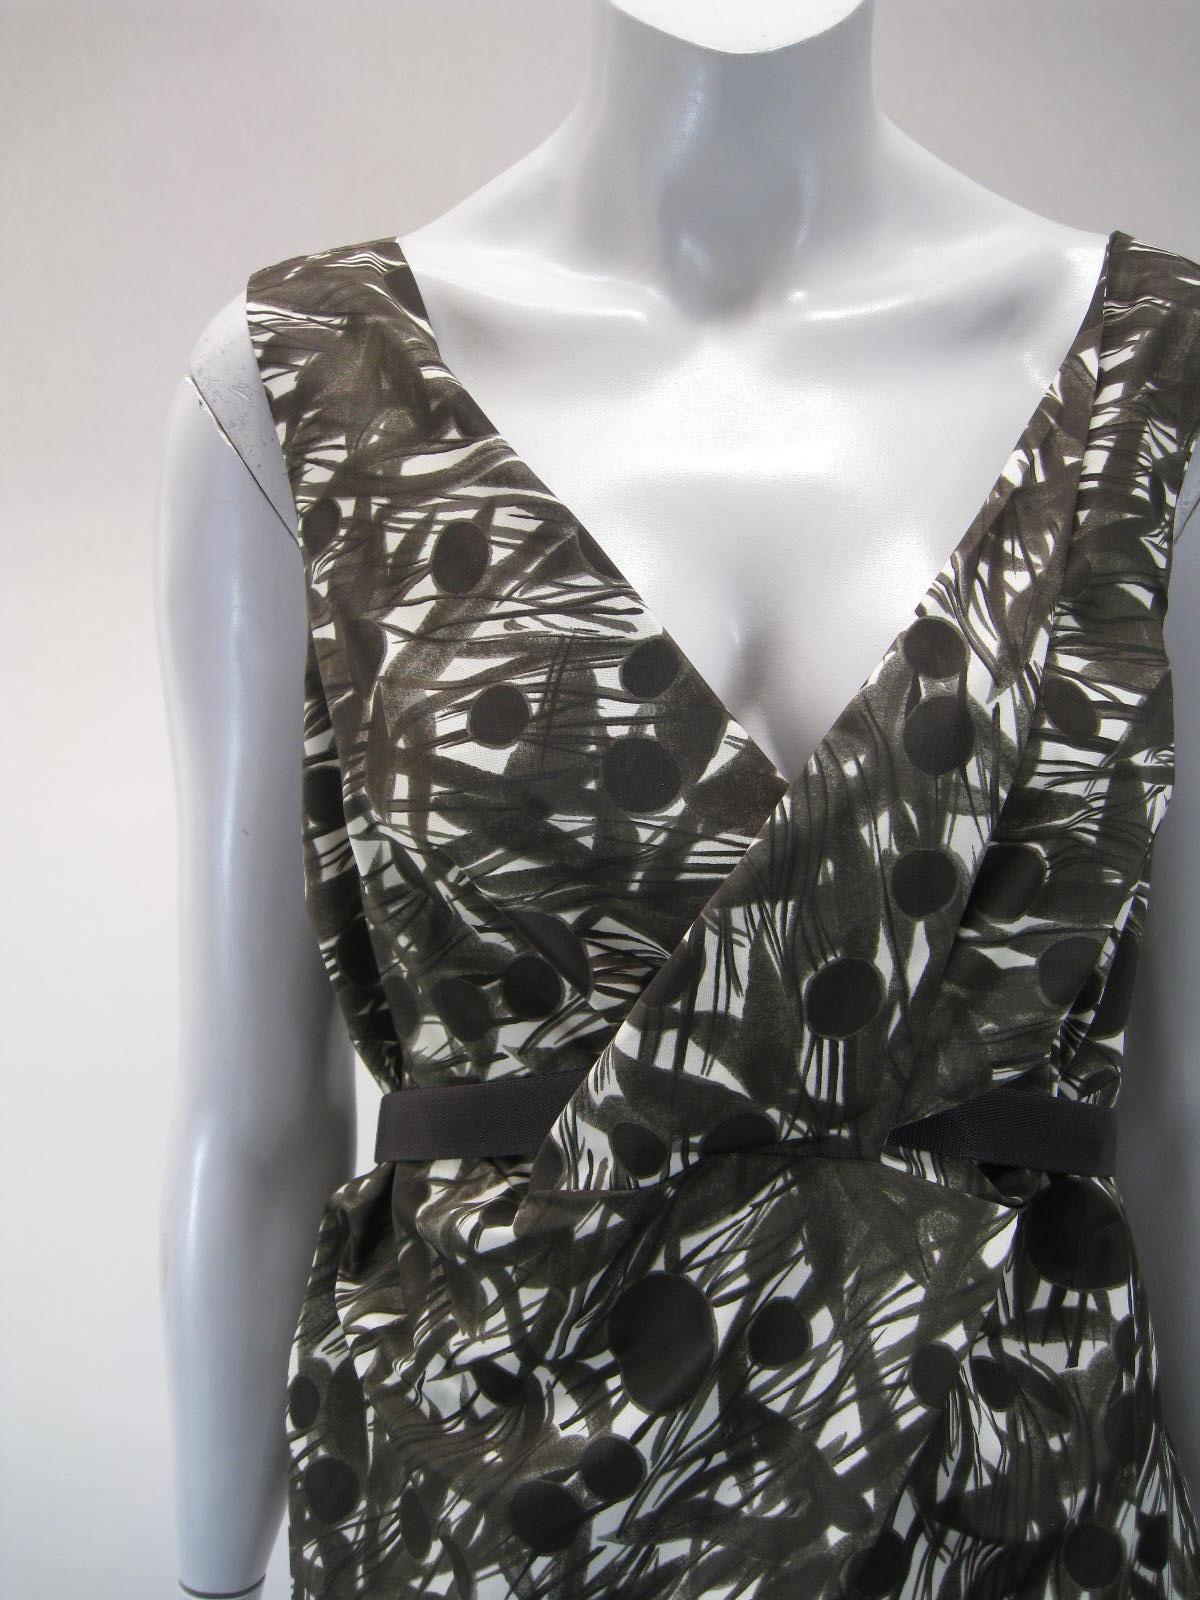 Marni sleeveless abstract print blouse.

Empire waist punctuated with removable strap belt.

Belt weaves through a hole in fabric.

Belt has nonadjustable snap closure.

Cross over bust line.

Shades of taupe/brown with off white.

Fabric is